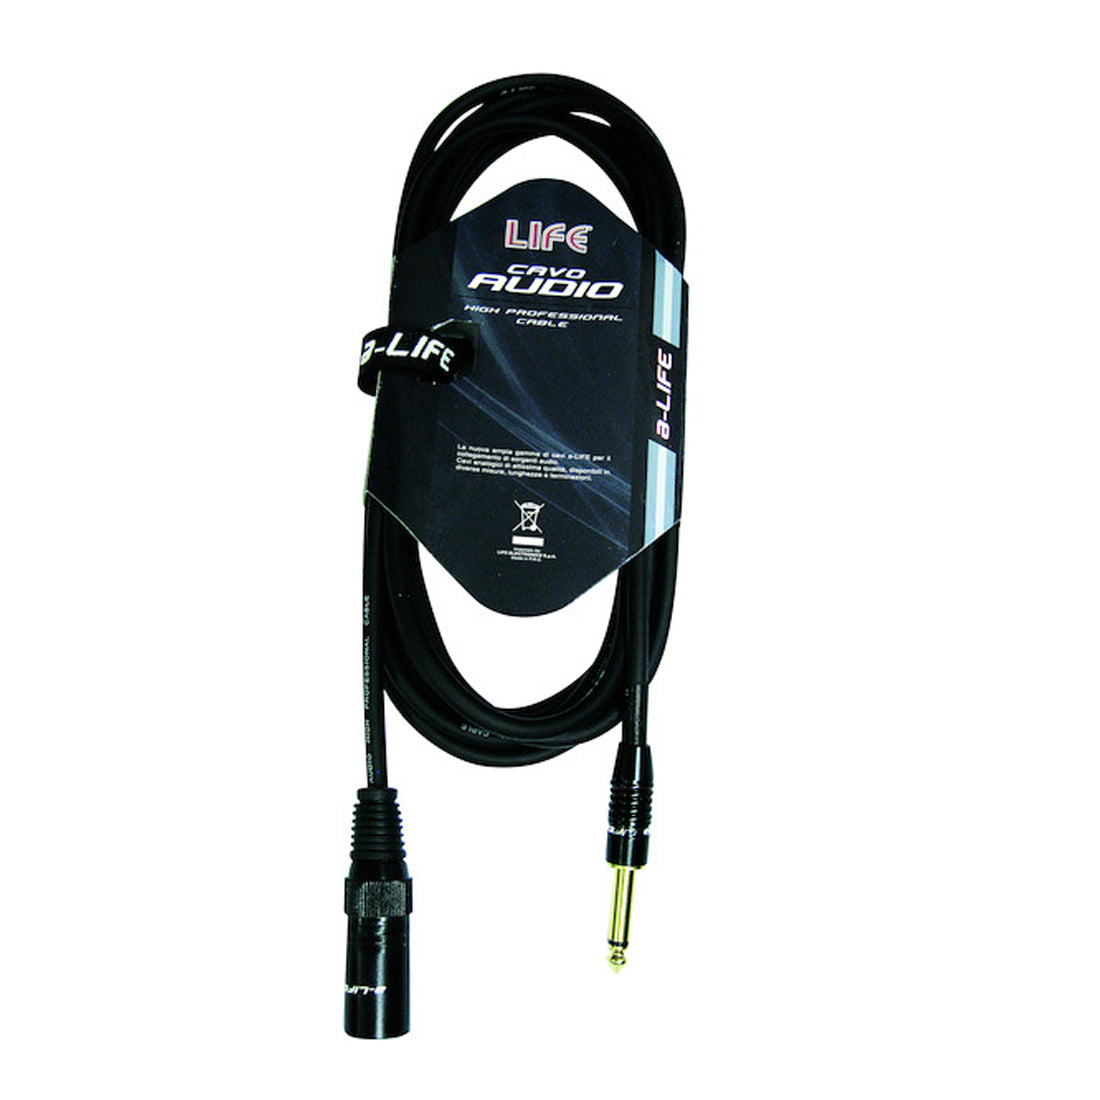 Life Audio cable 6.3 mm mono Jack plug and Cannon plug, 6 meter microphone cable